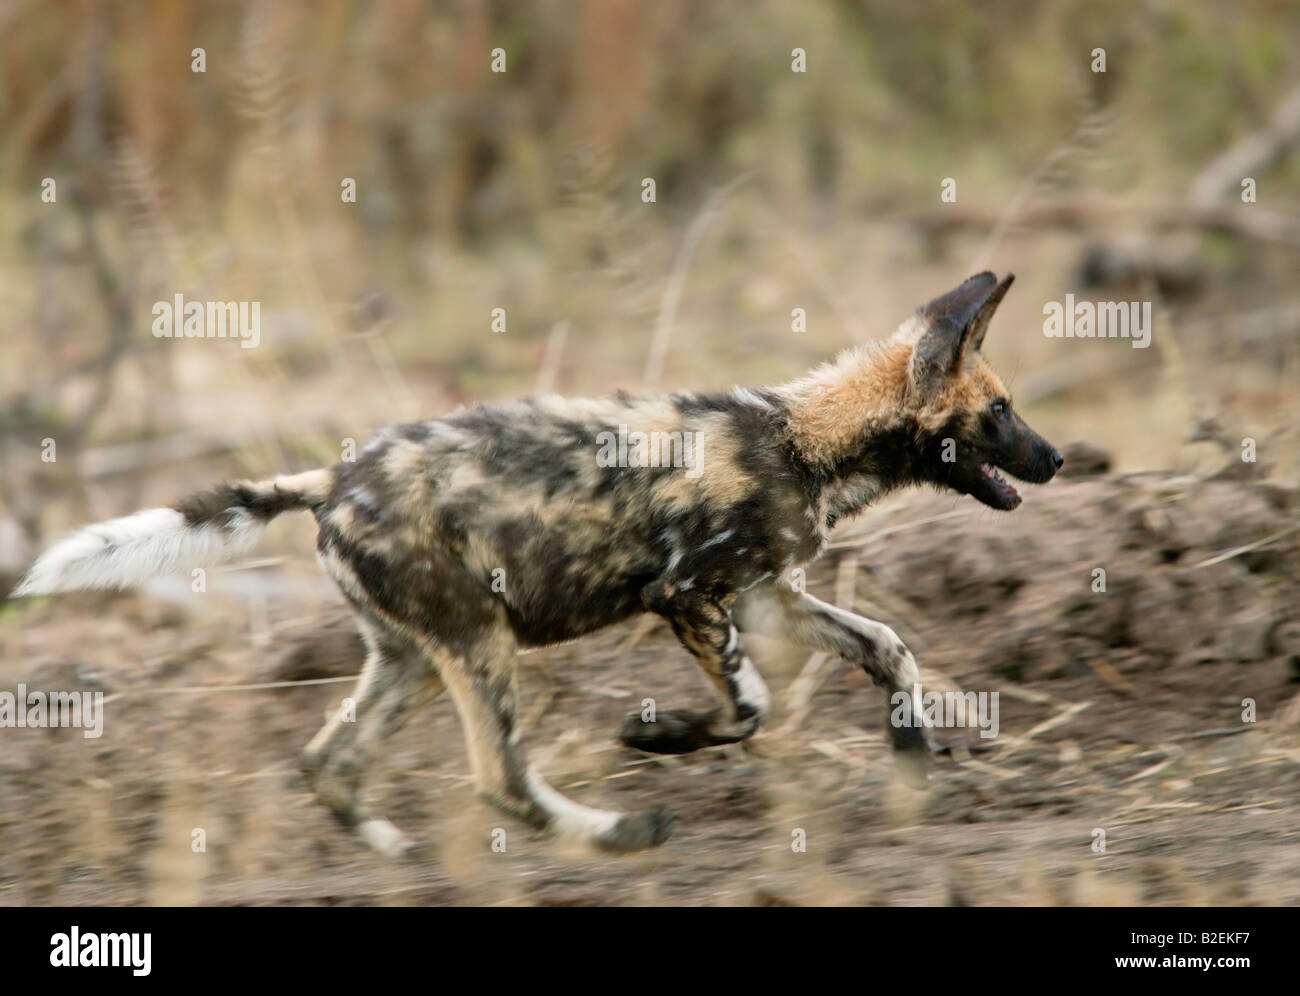 Wild Dog pup in esecuzione Foto Stock